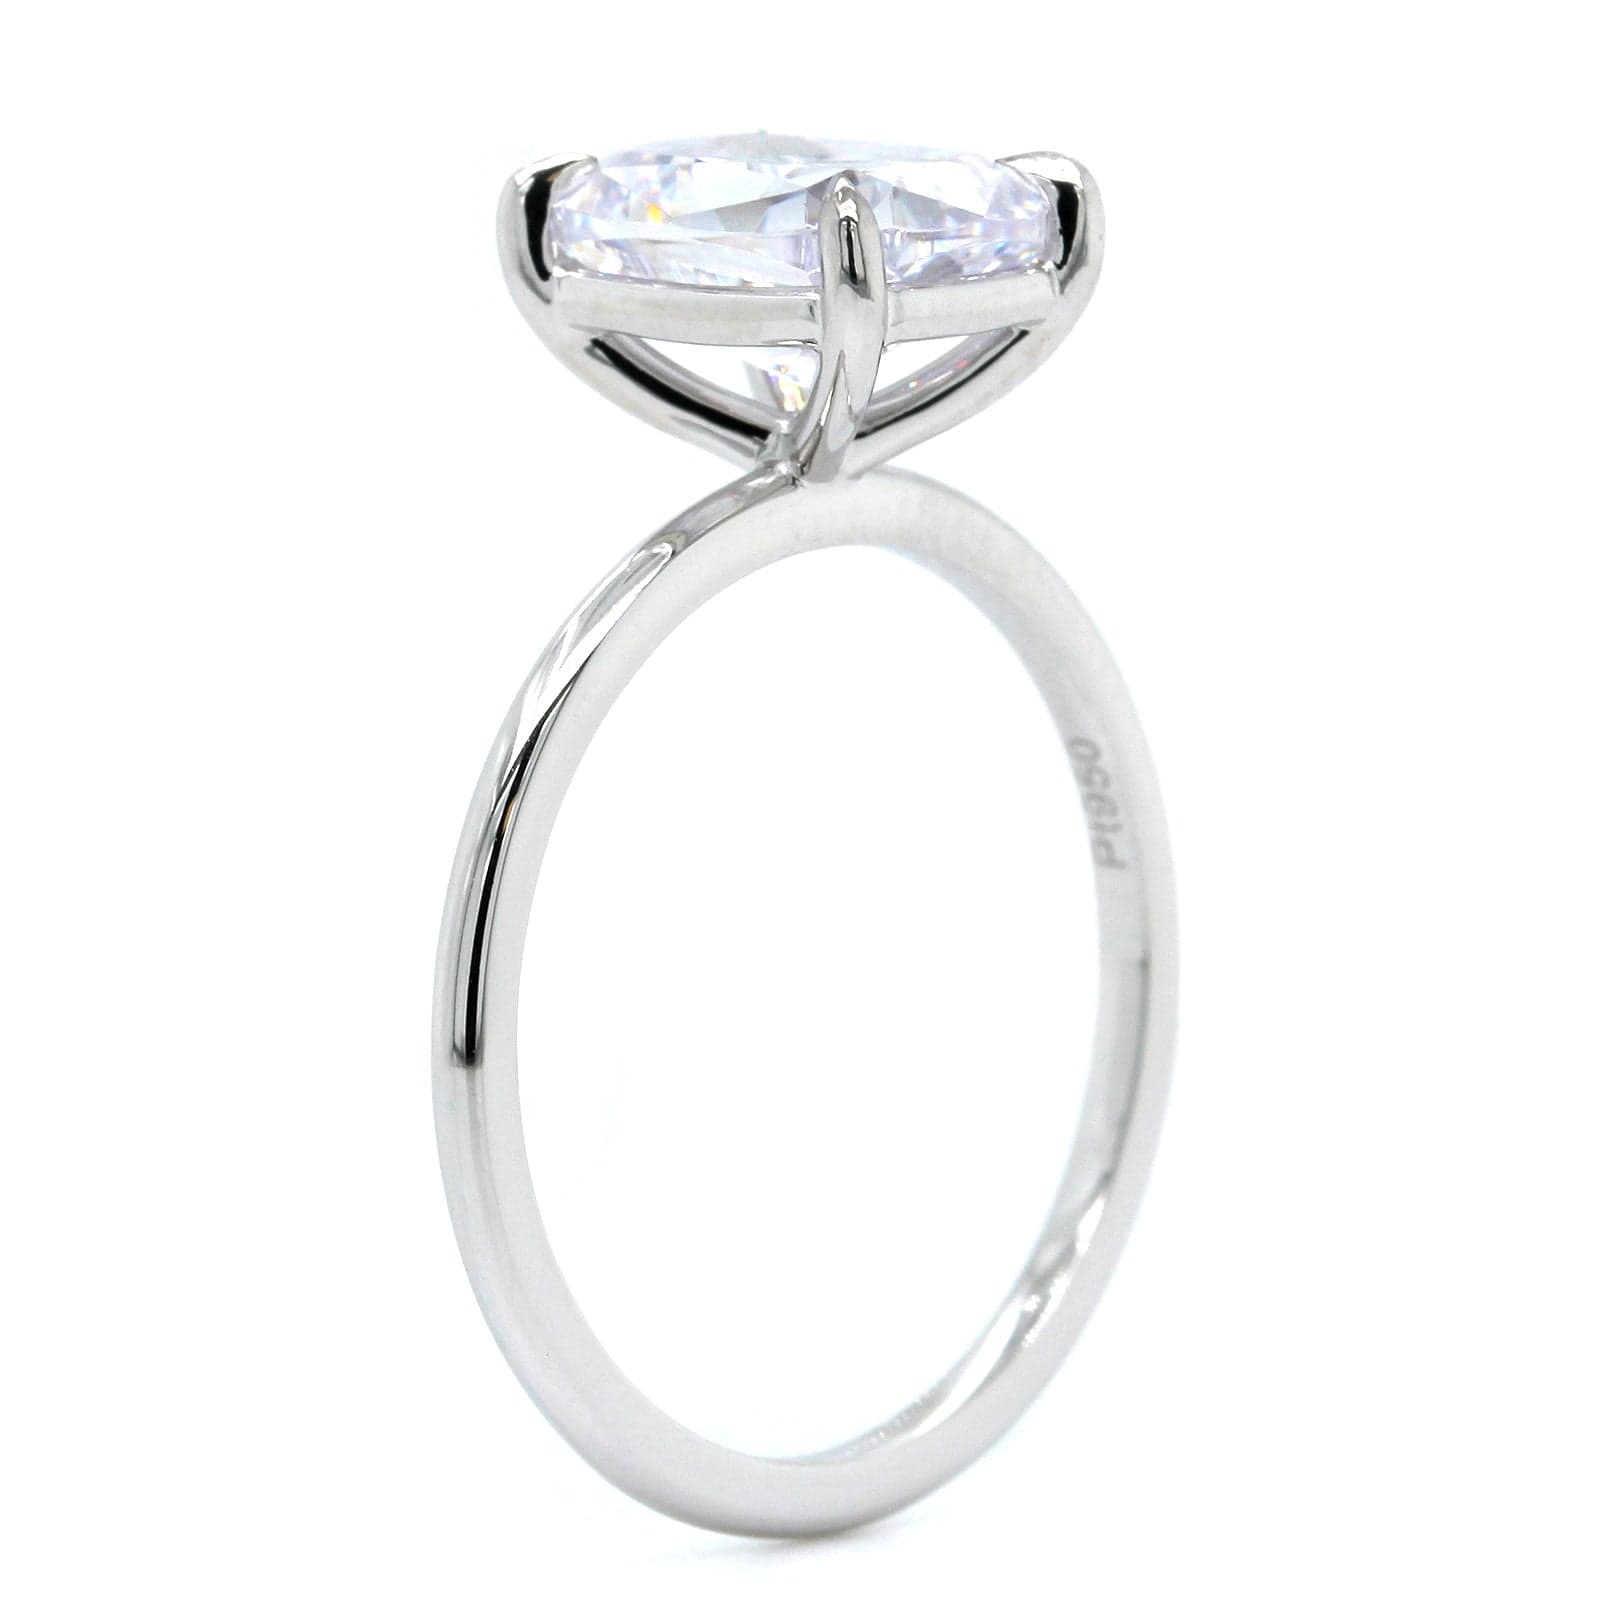 Platinum Cushion 4 Prong Solitaire Engagement Ring Setting, Platinum, Long's Jewelers